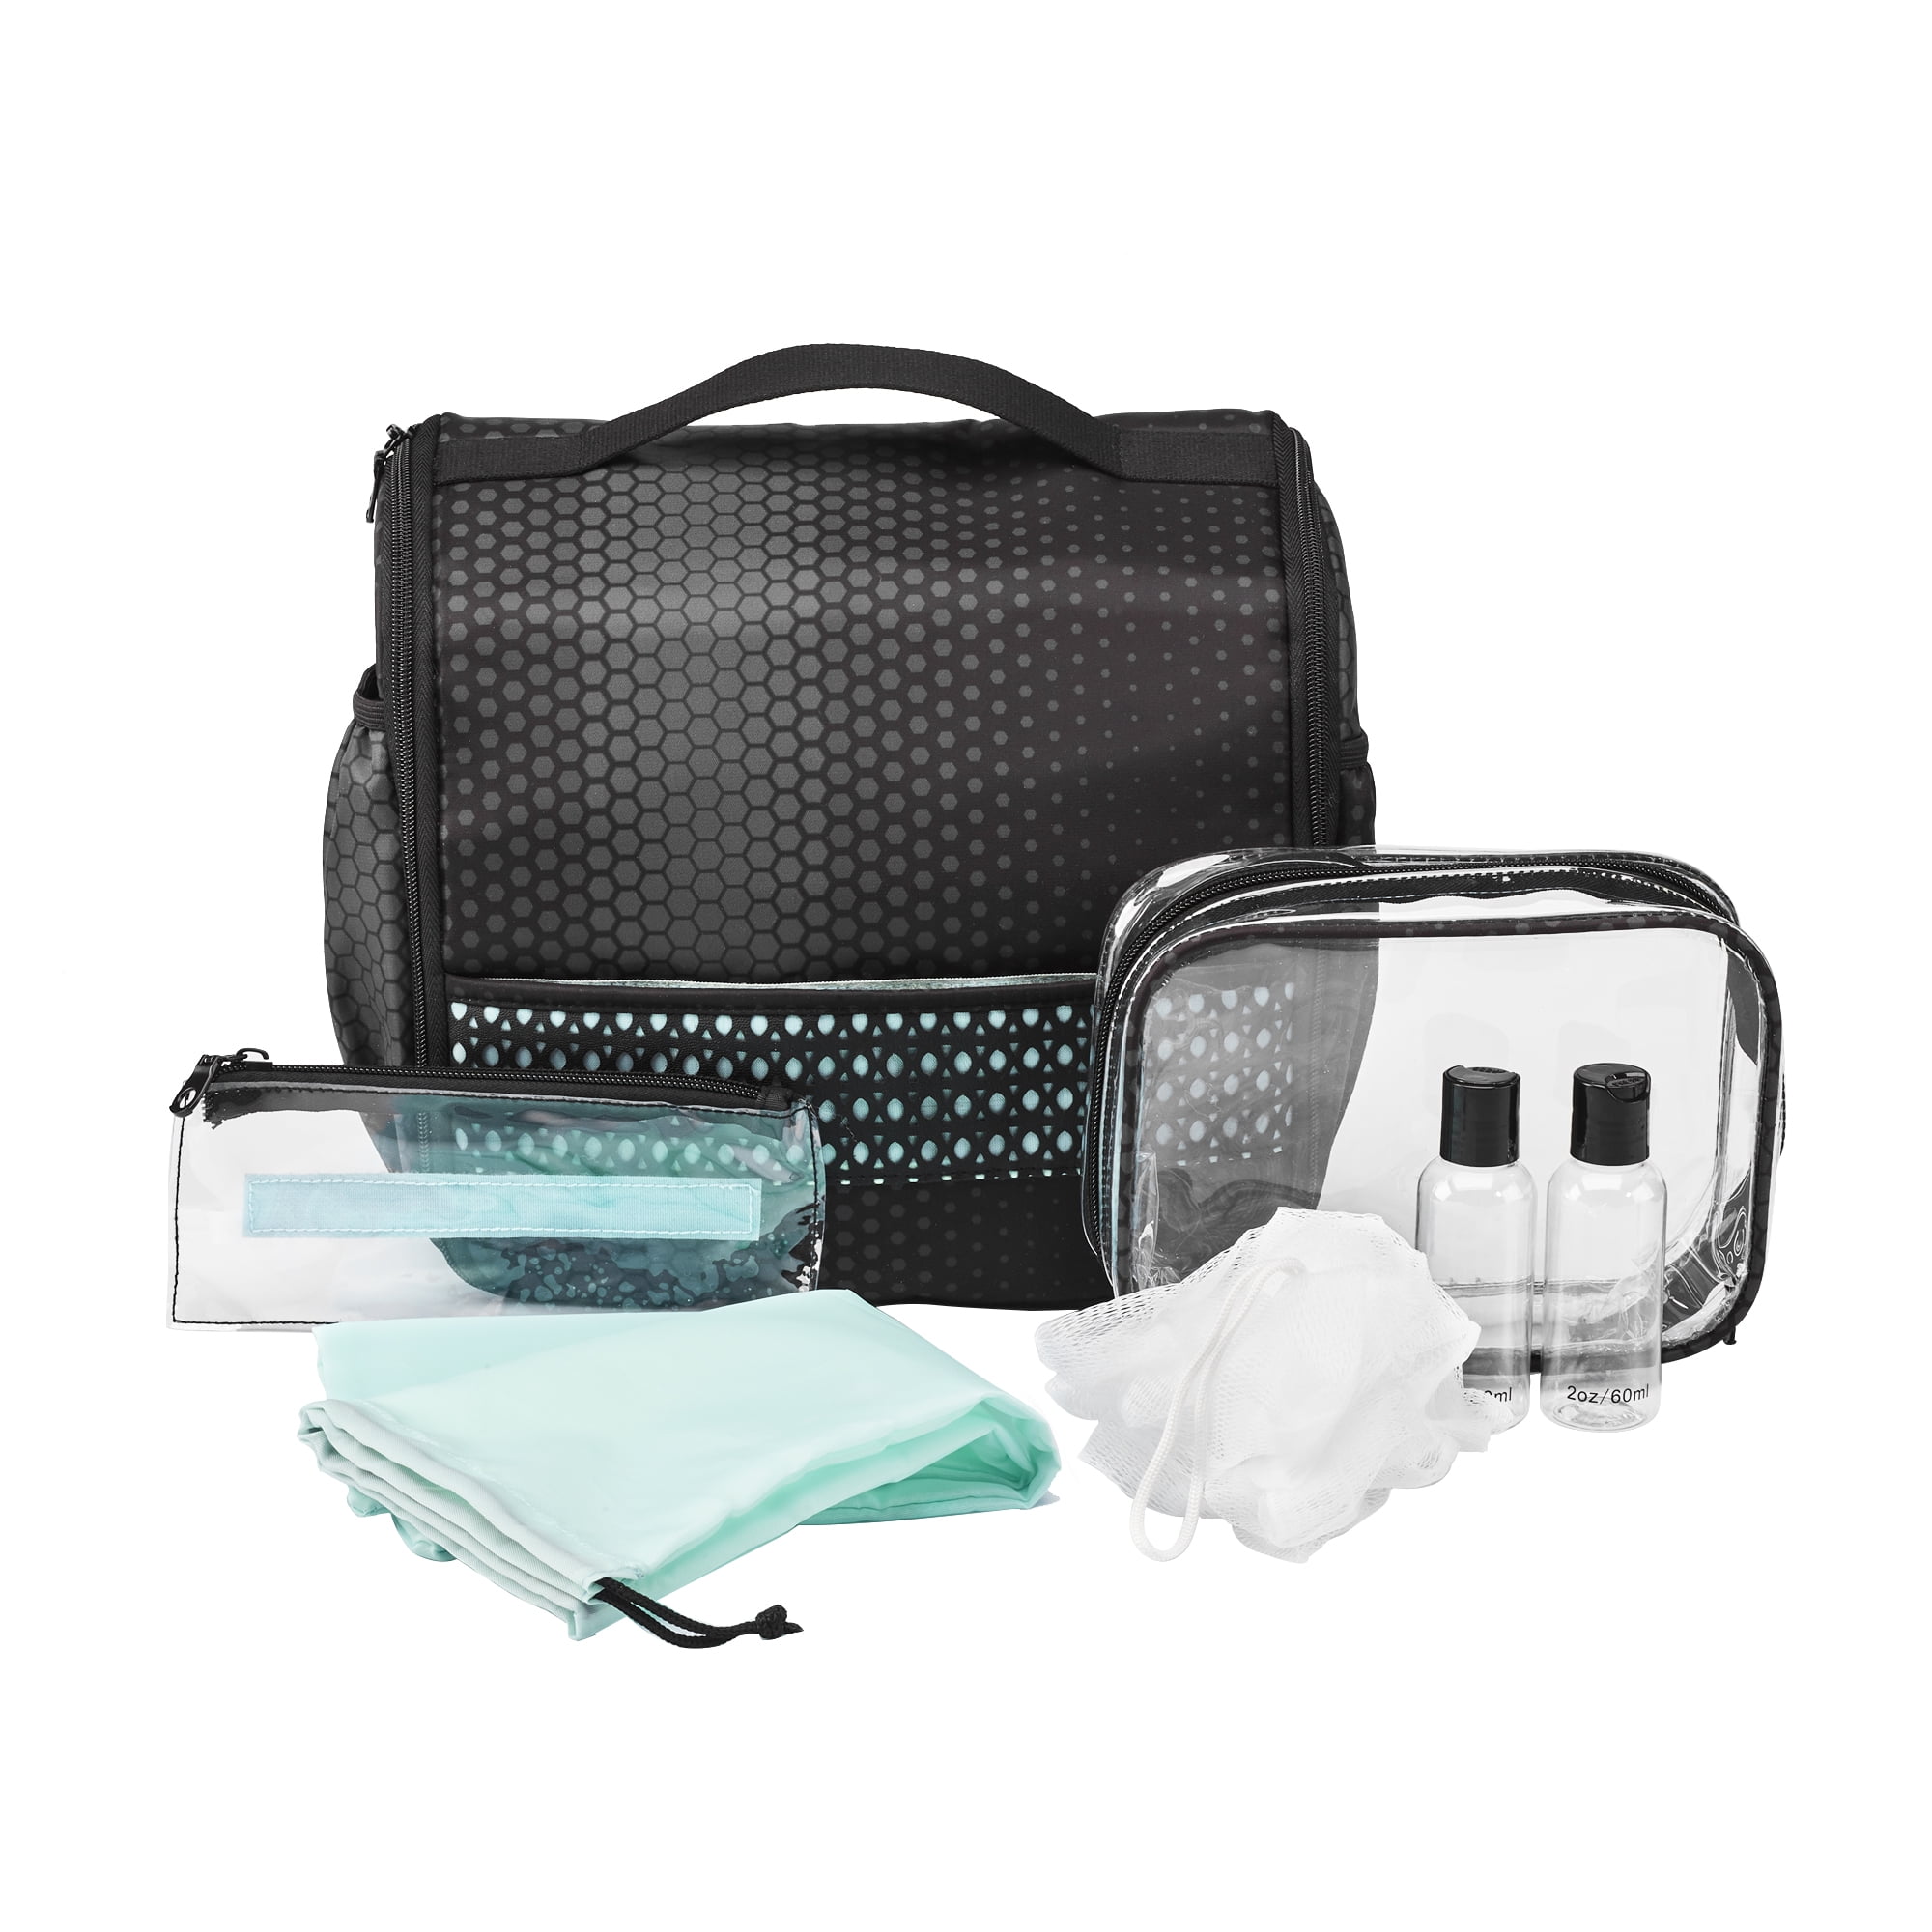 Modern Sport Hanging Toiletry Organizer with 2 Travel-Size Liquid Bottles,  Shower Loofah, Drawstring Bag, Removeable On-the-Go Case and Small Pouch in  Classic Tiffany Blue Laser Cut Black Design - Walmart.com